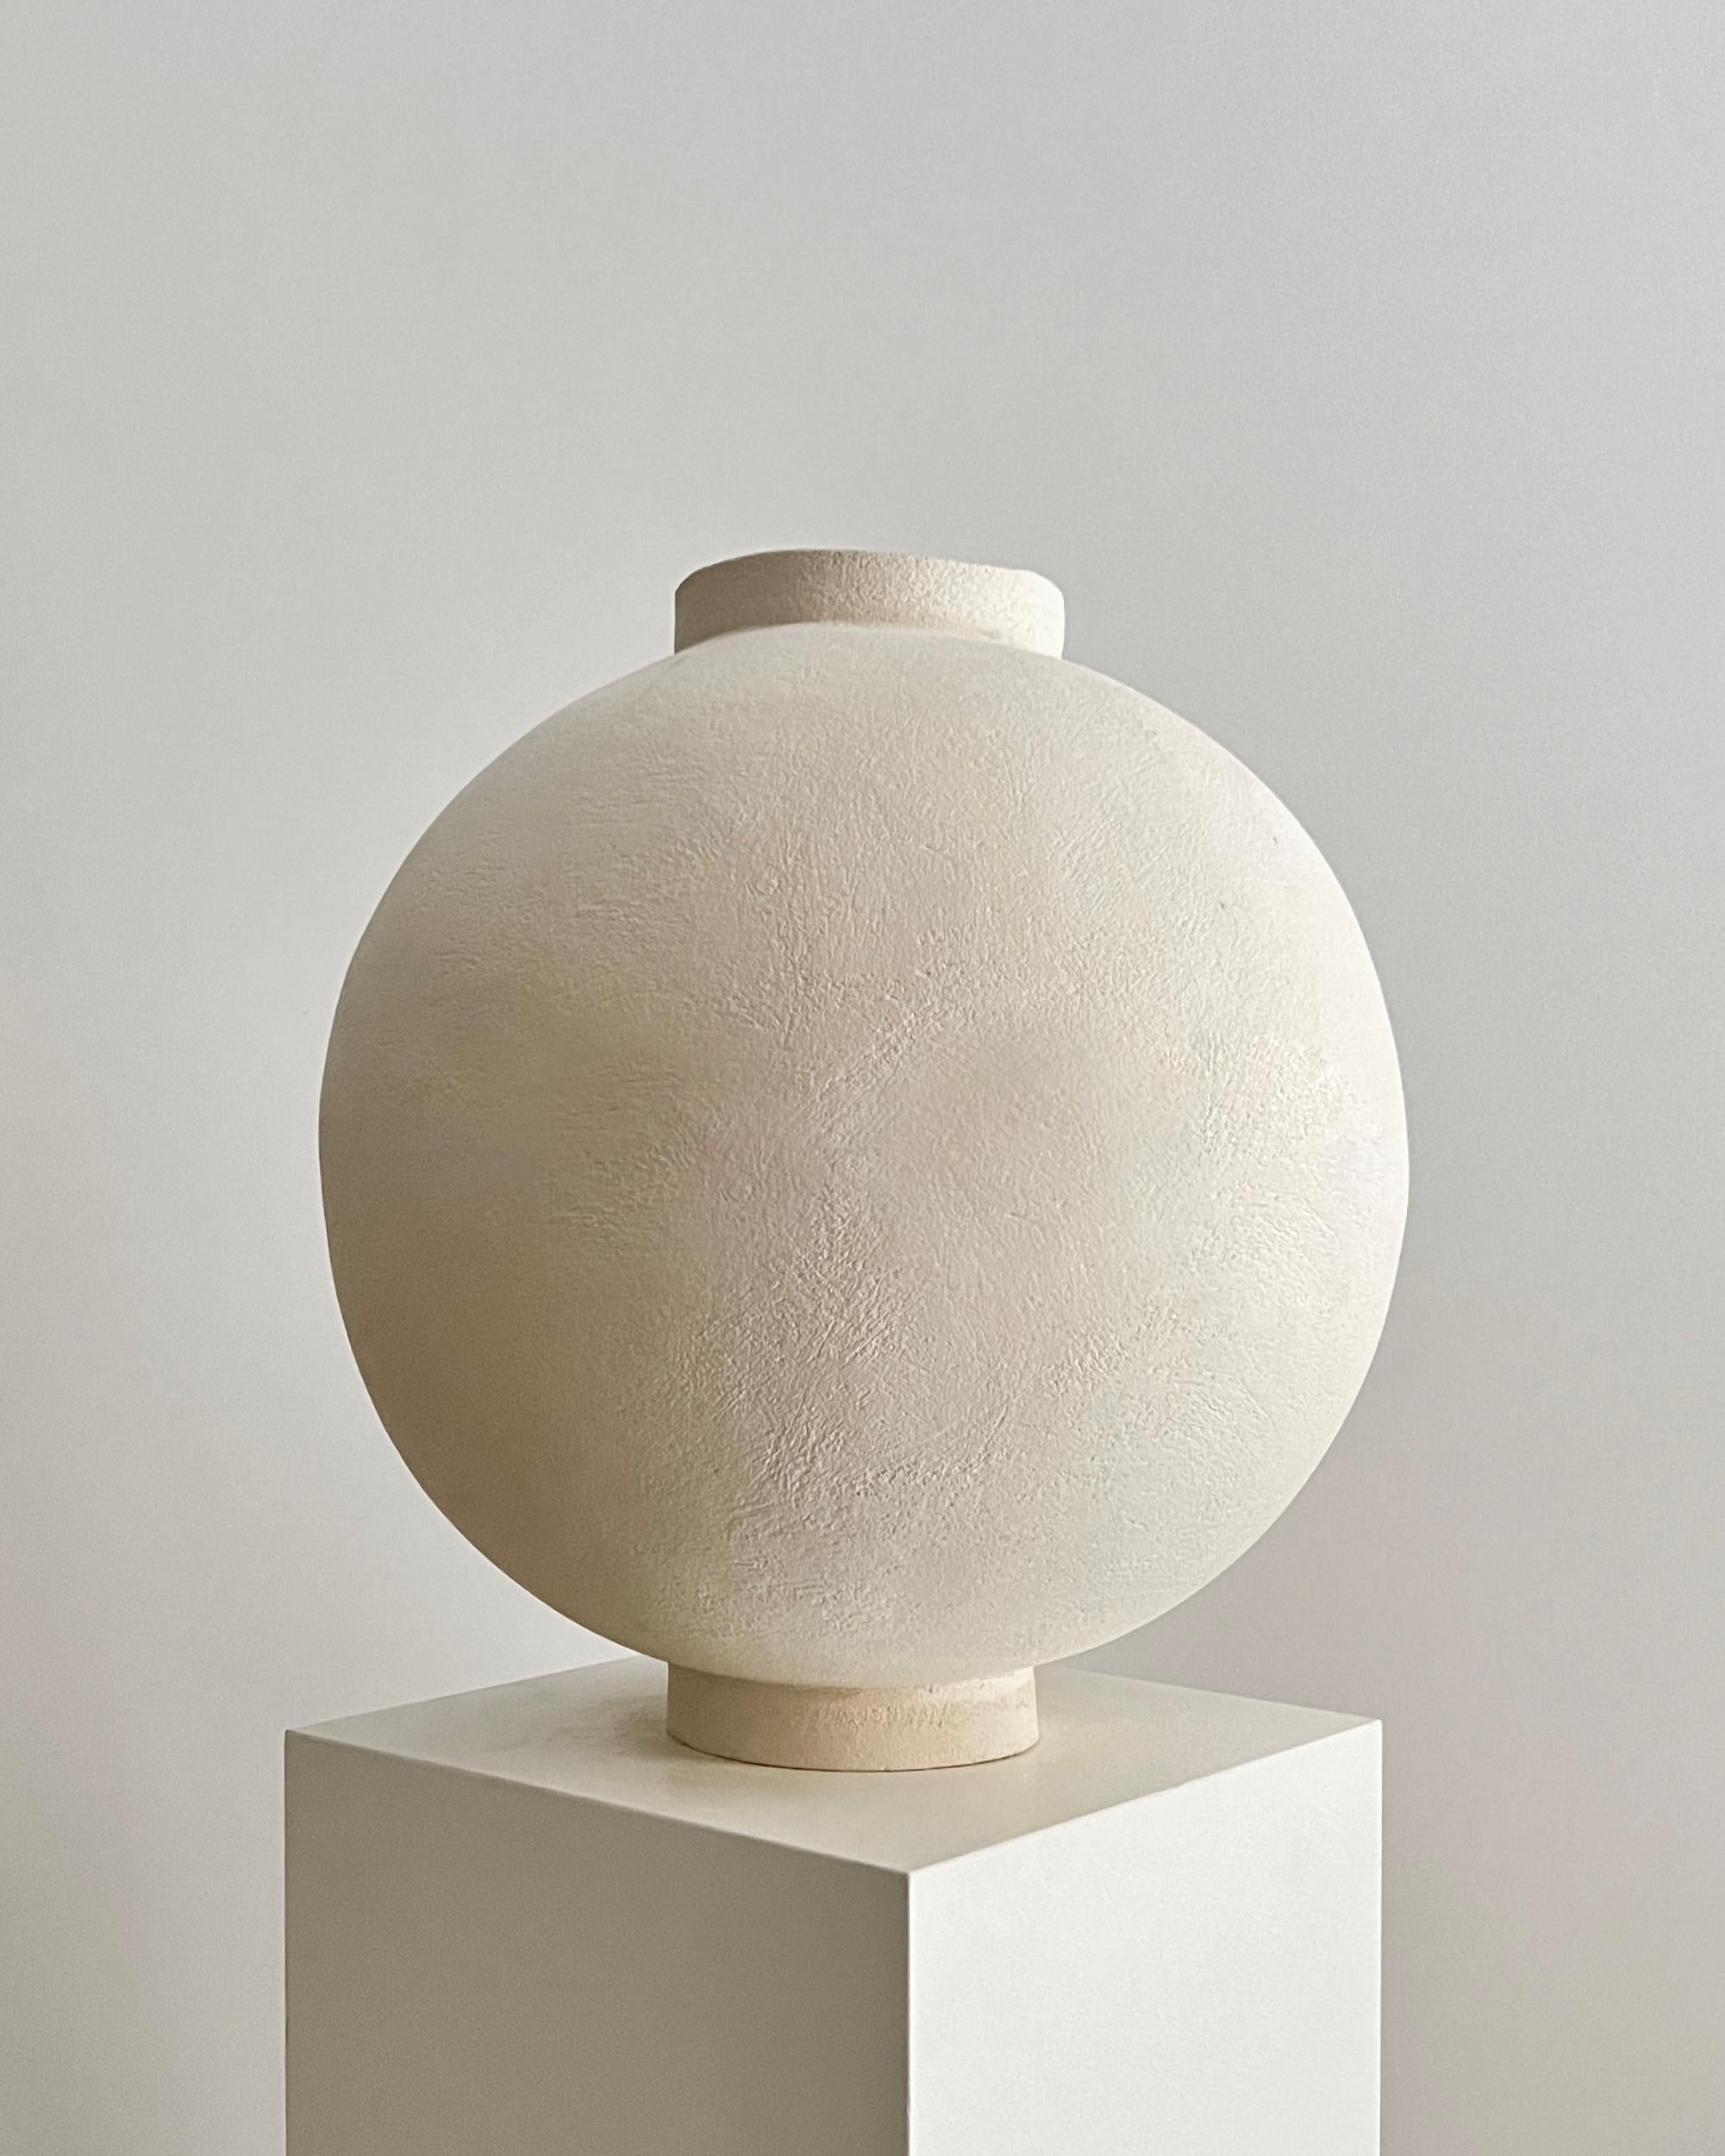 Echo Vessel by Laura Pasquino
One of a Kind
Dimensions: D 43 x H 44 cm
Material: Ceramic
Finishing: Textured, Glazed Inside
Artist stamp on the bottom
 
Laura Pasquino
Incorporating references from ancient Korean ceramics as well as principles of